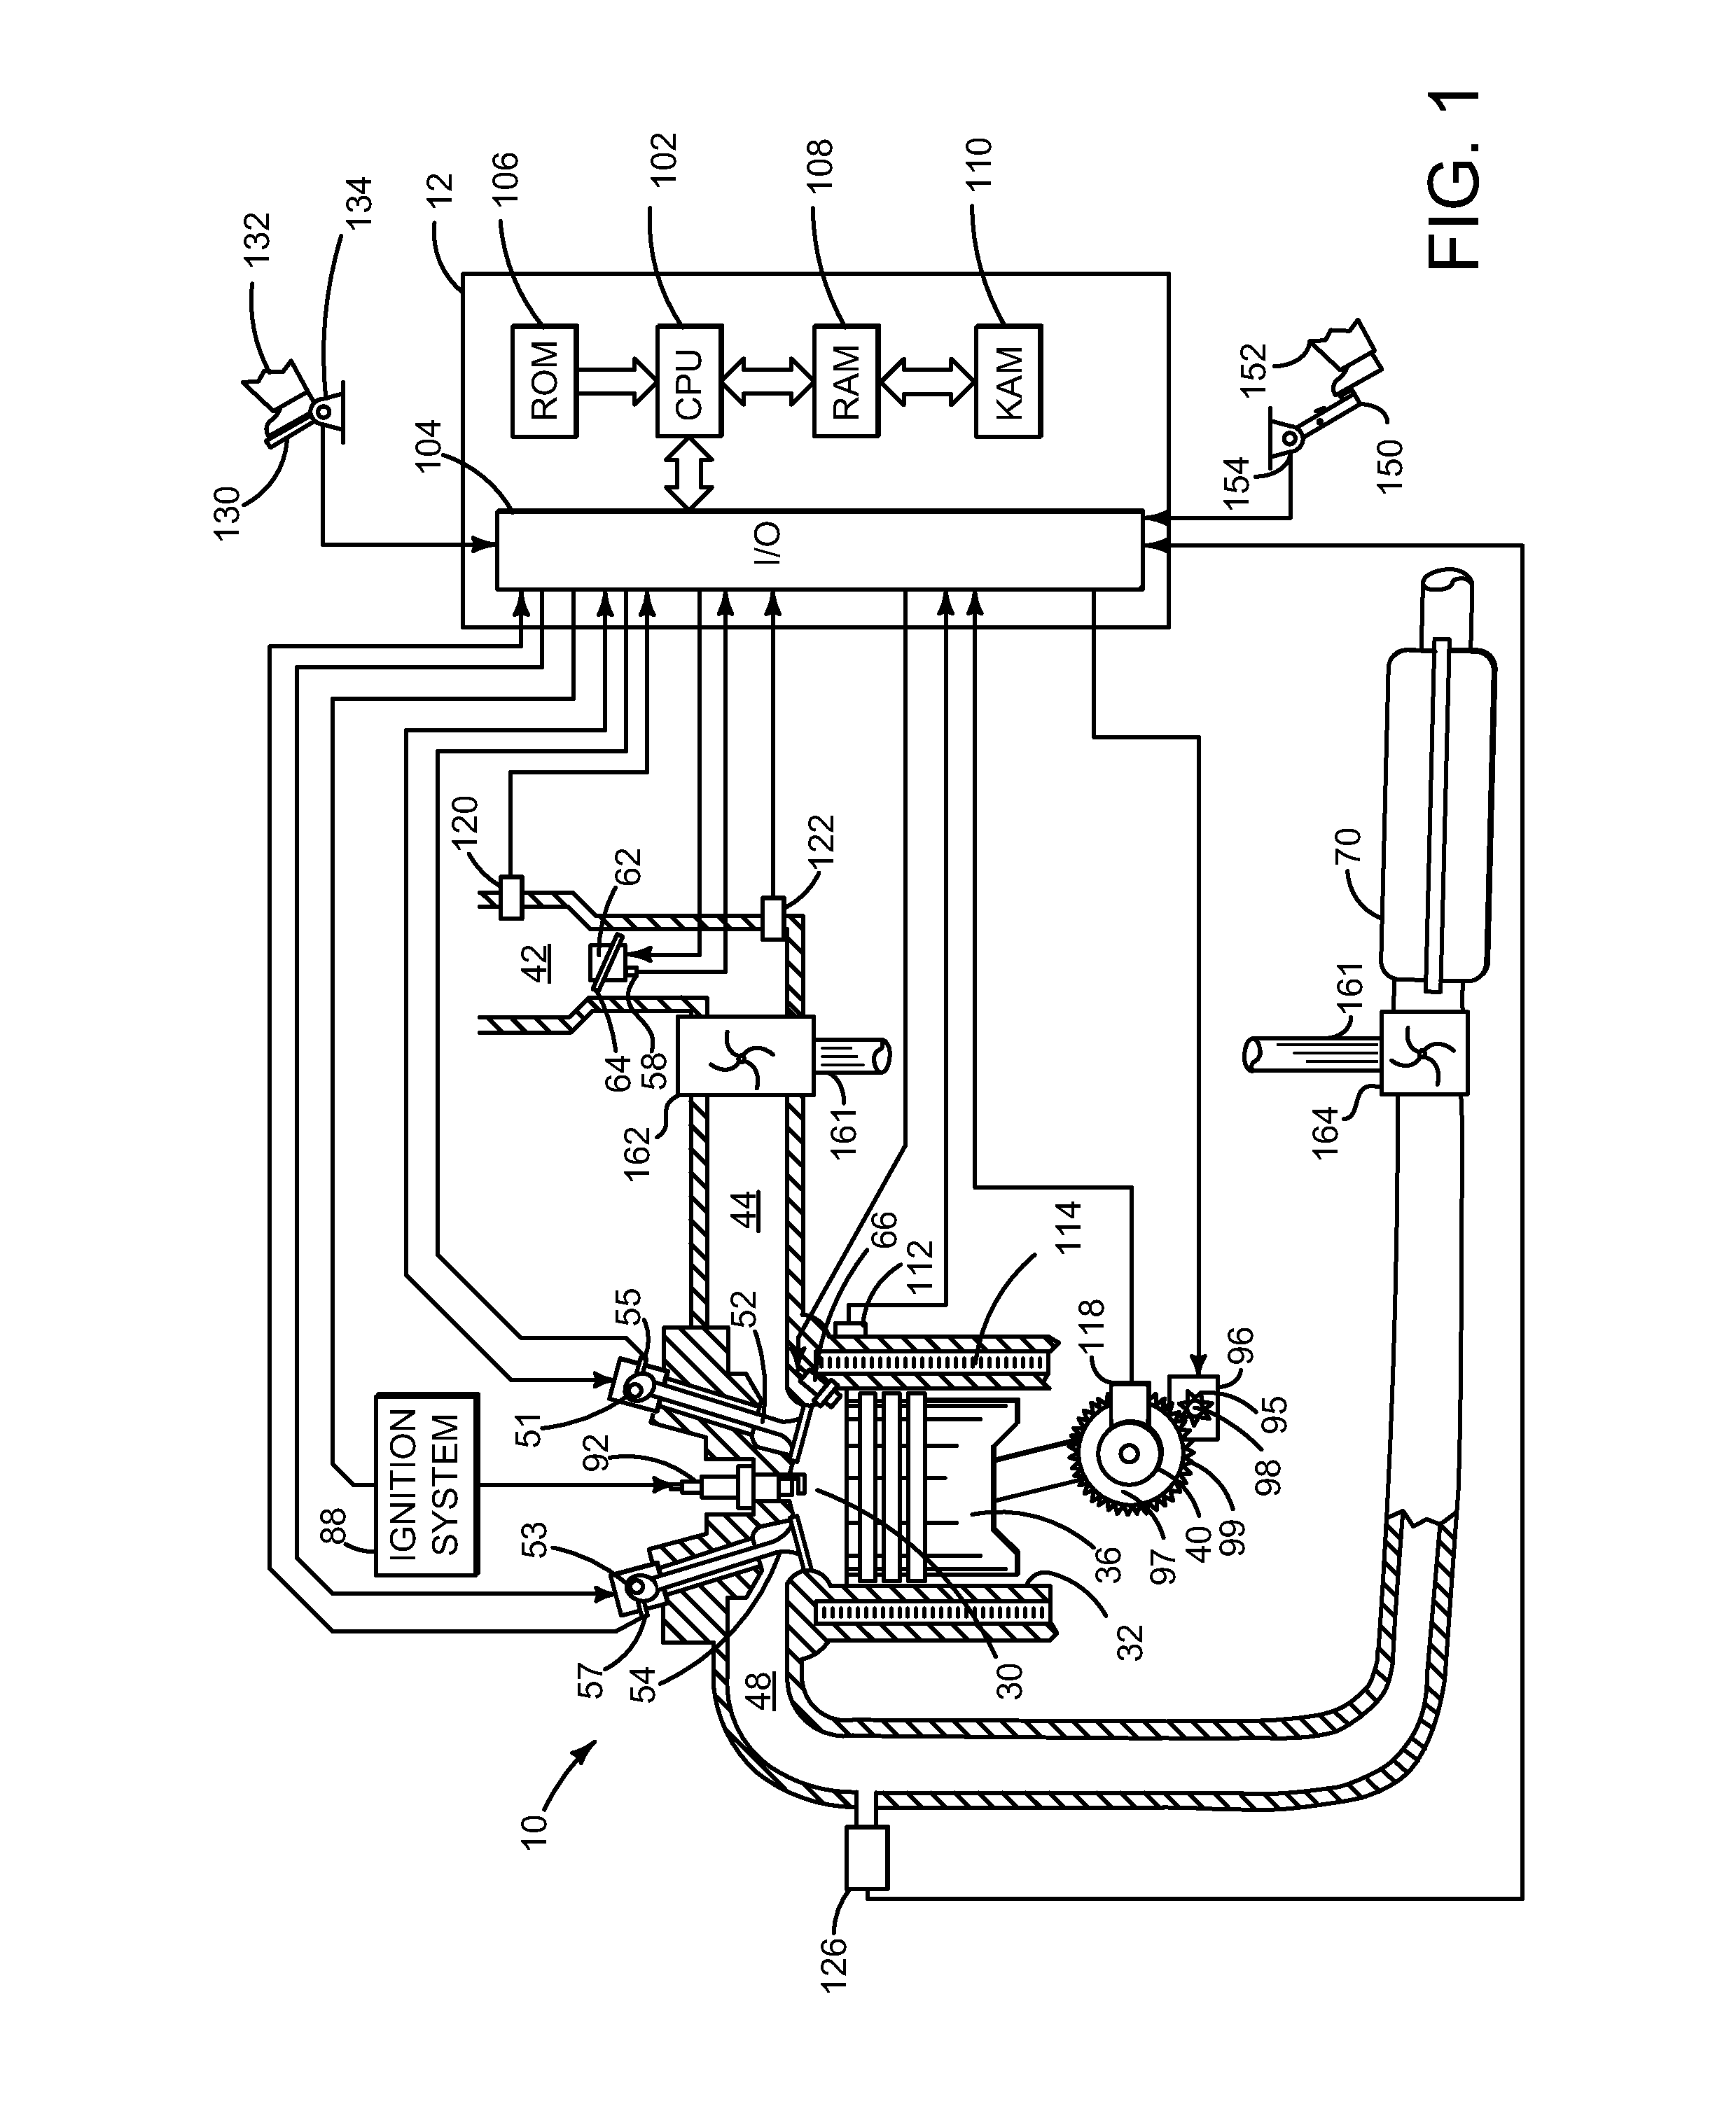 Methods and system for operating a hybrid vehicle in cruise control mode